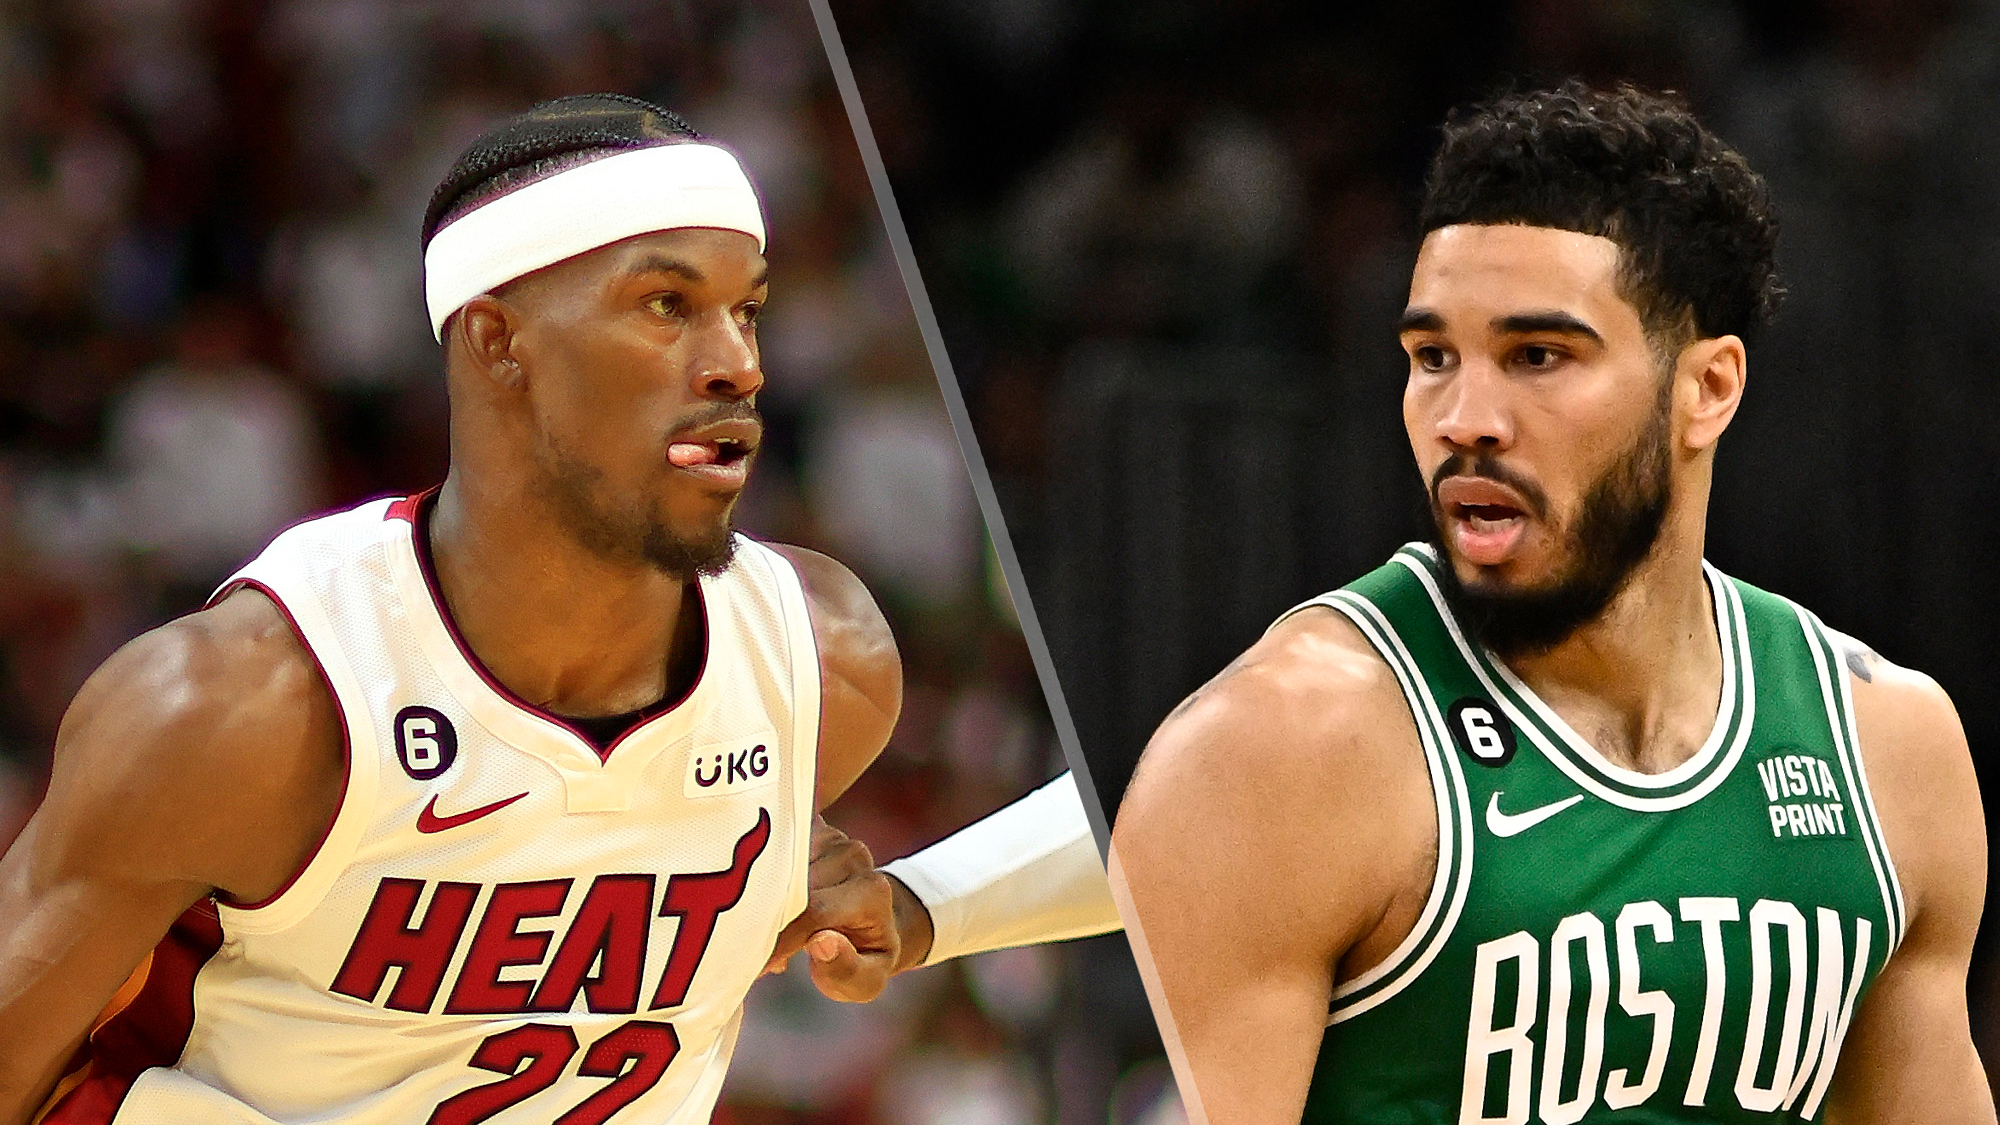 Heat vs. Celtics live stream How to watch NBA Playoffs game 1 right